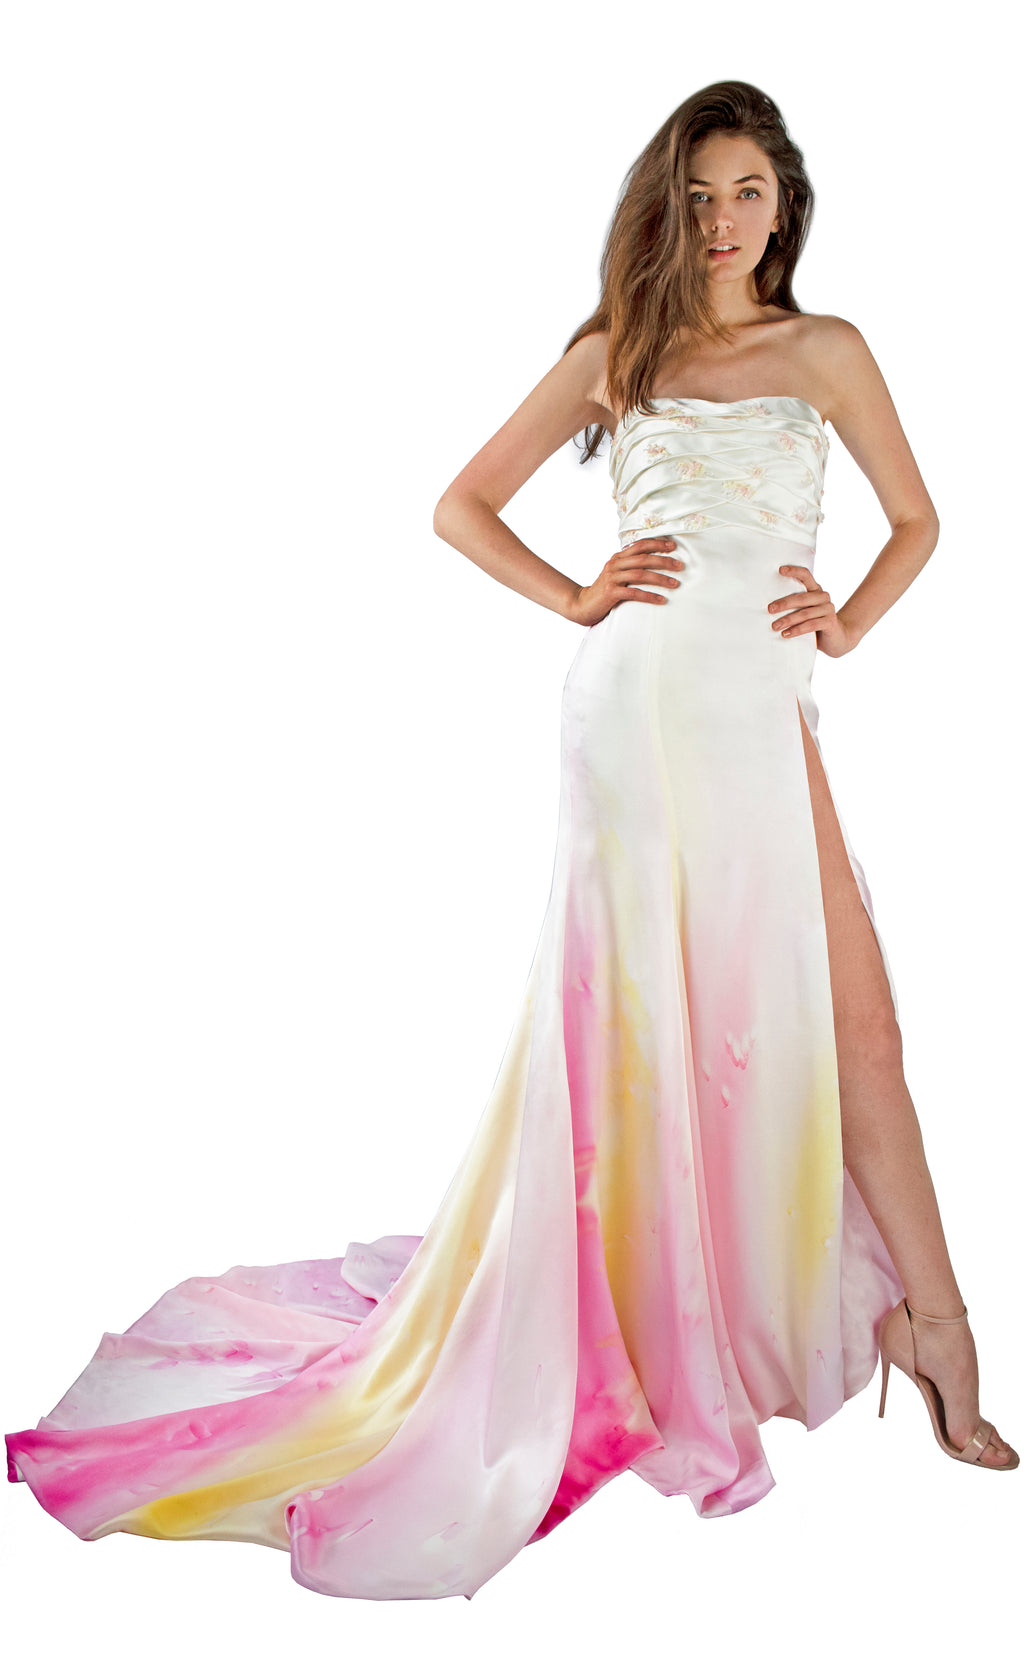 Lady of Verona Silk-Painted Gown with Ribbon Embroidery - KxLNewYork